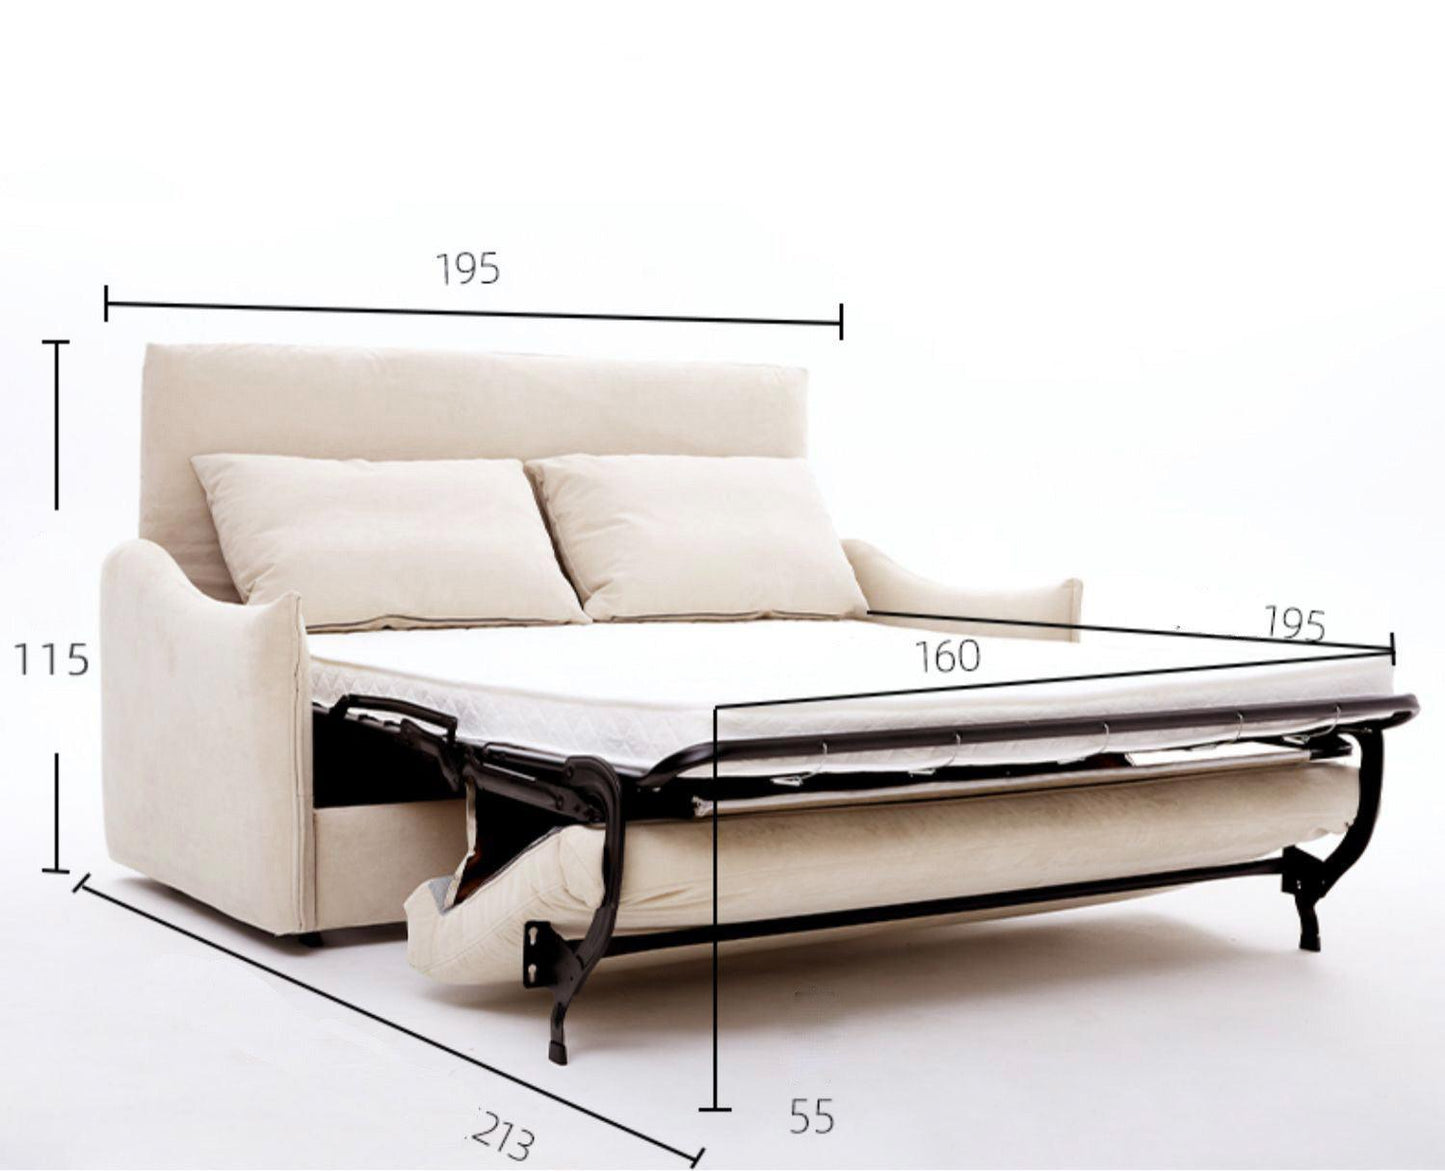 home-atelier-f31a Water Repellent and Scratch Resistant Fabric / Super Queen Size/ Length 195cm / Cream Acacia Foldable Sofa Bed with Mattress